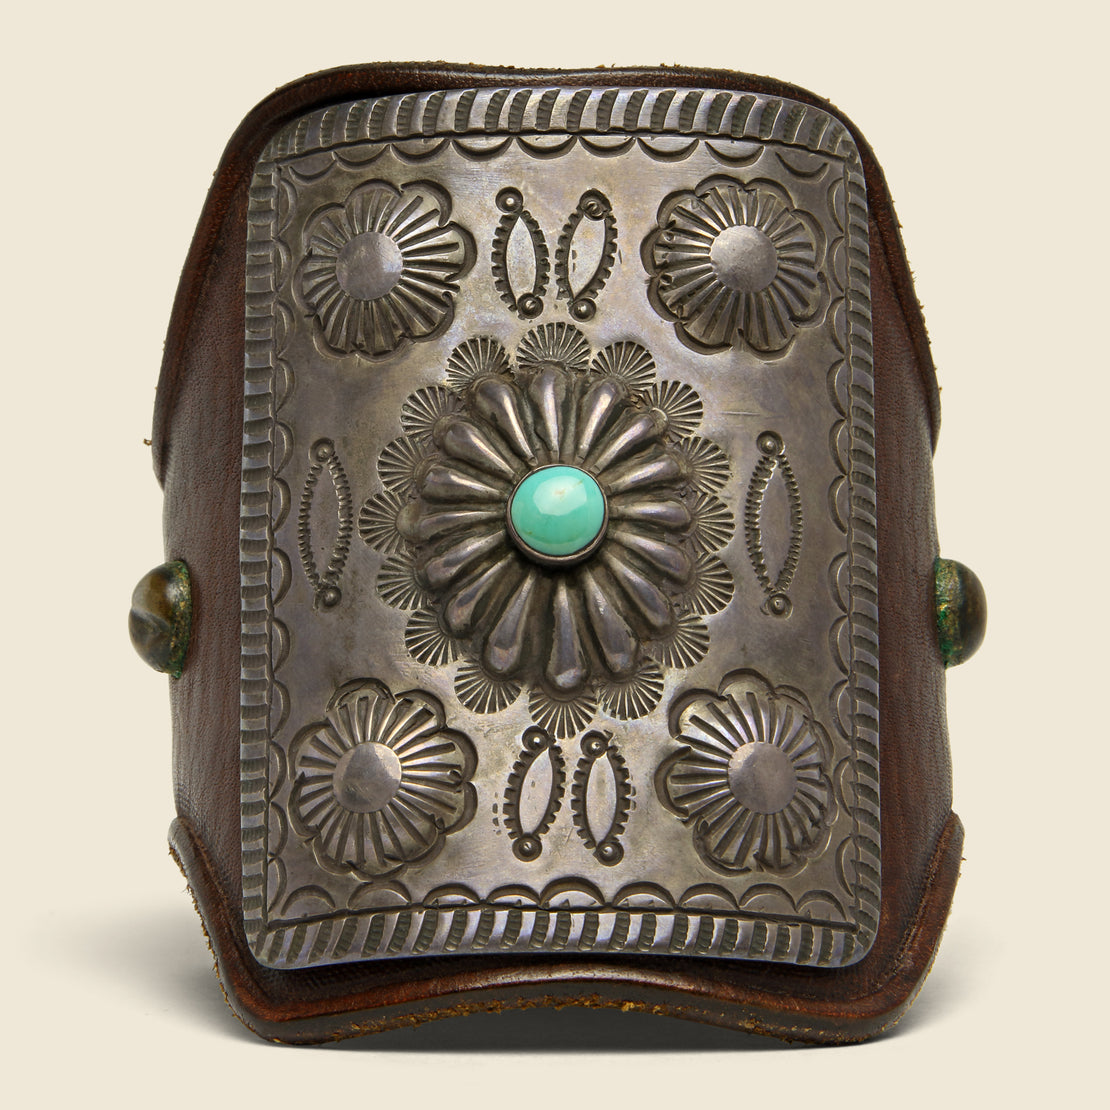 Stamped Concho Flower Leather Ketoh - Sterling/Turquoise/Leather - Smith Bros. Trading Co. - STAG Provisions - Accessories - Cuffs